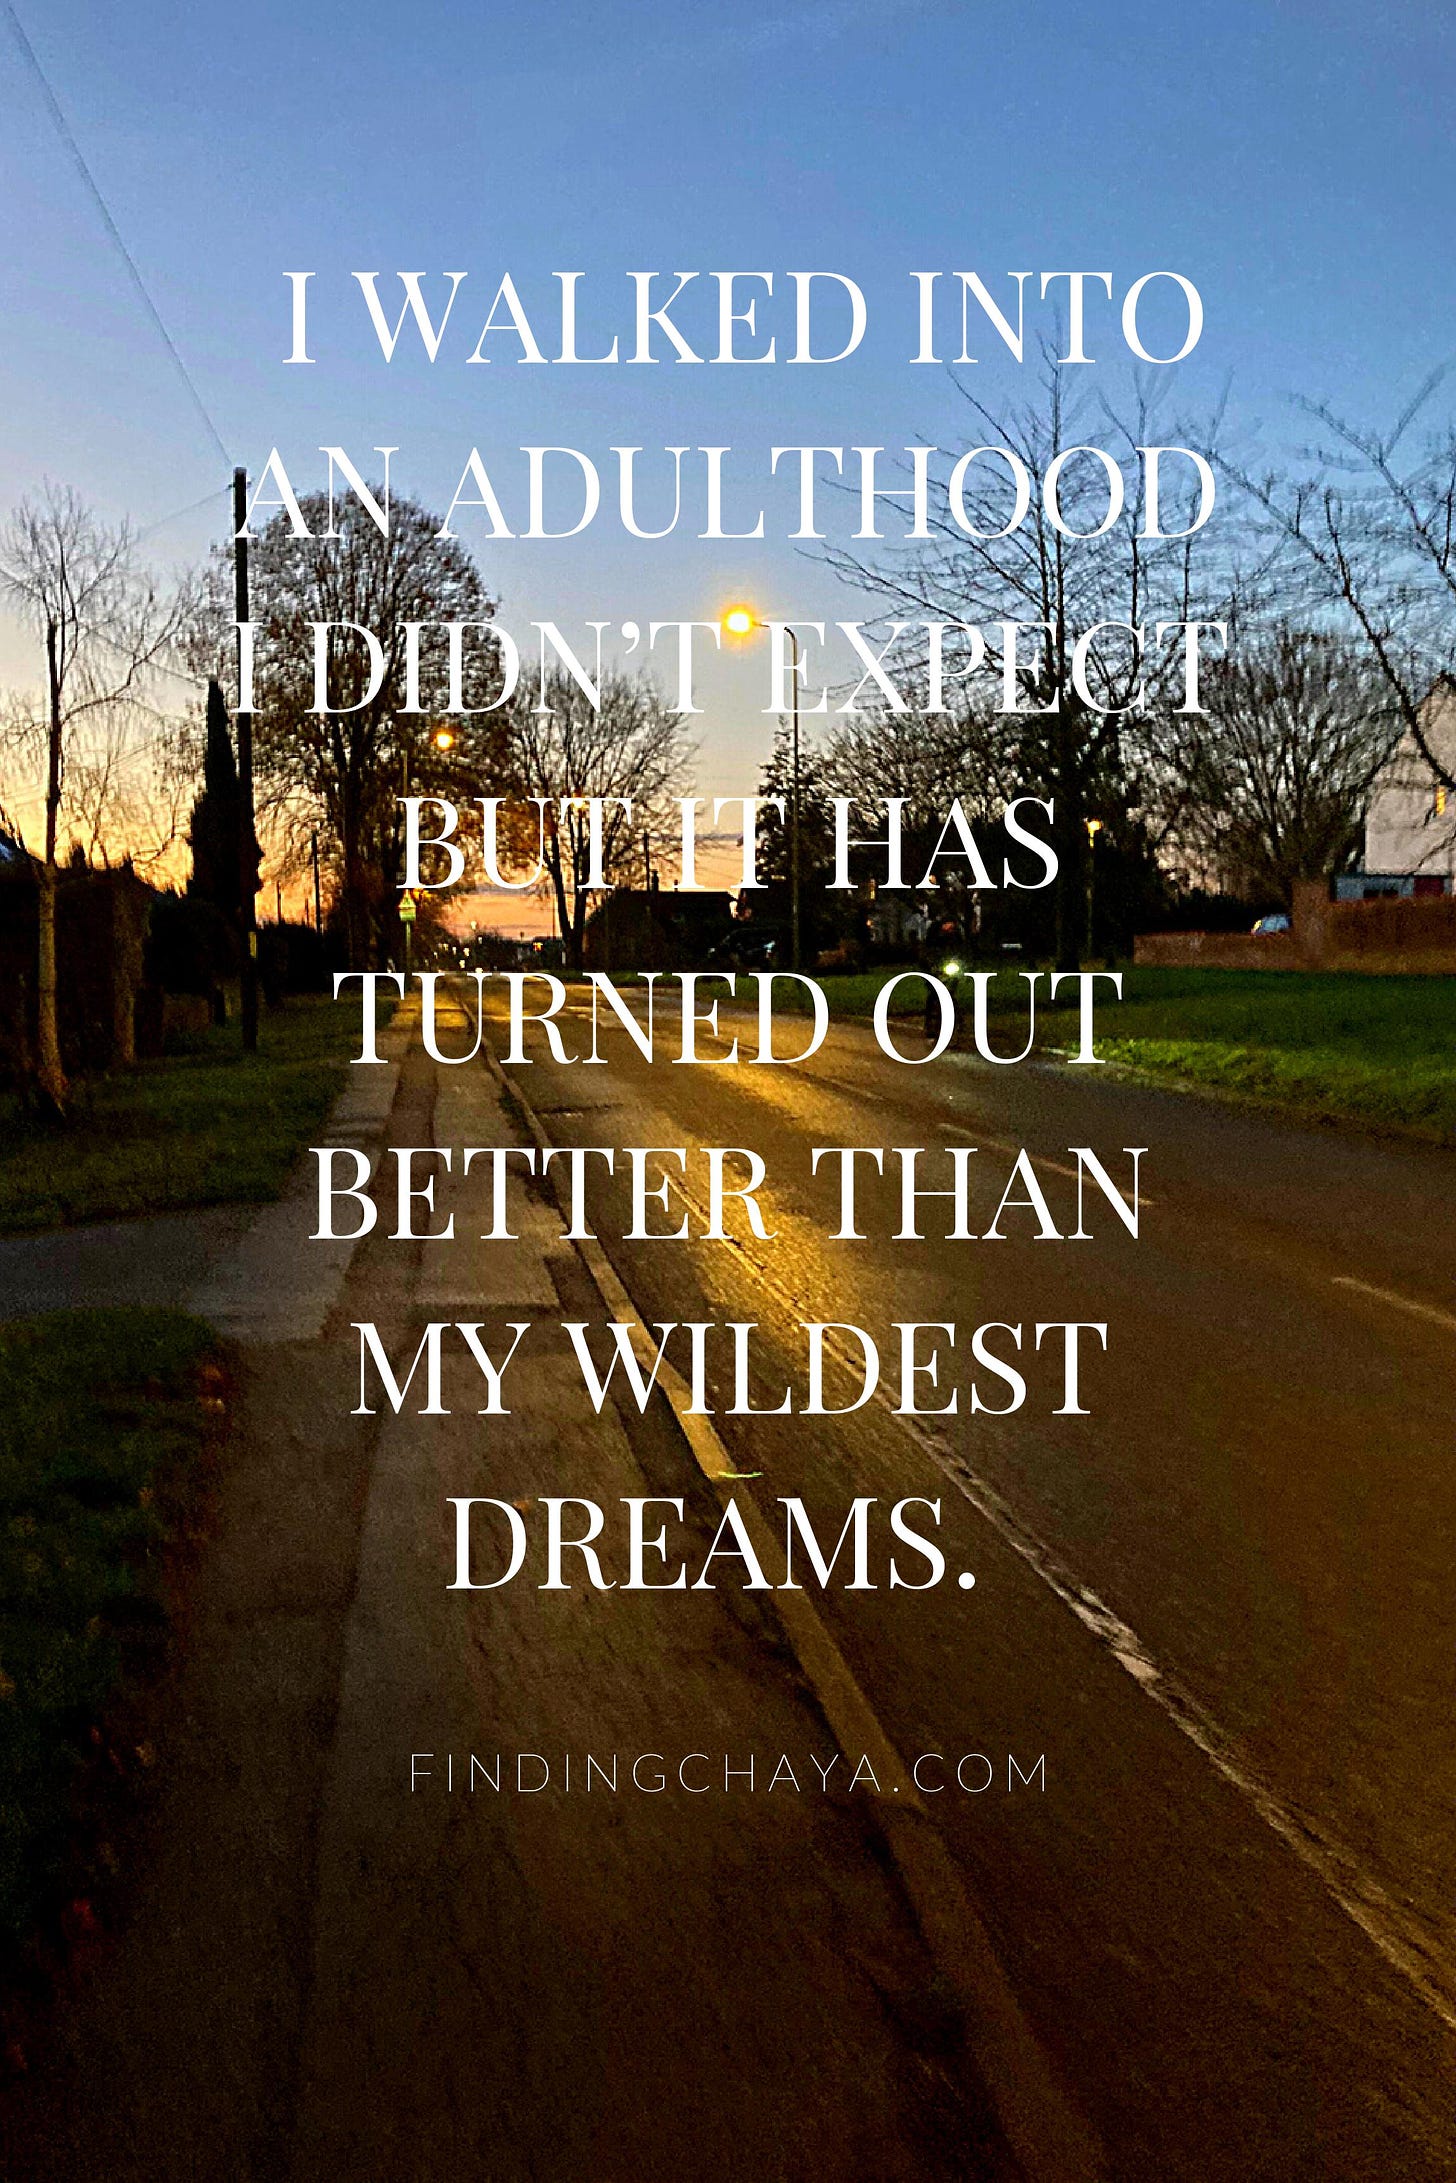  I walked into an adulthood I didn’t expect but it has turned out better than my wildest dreams.